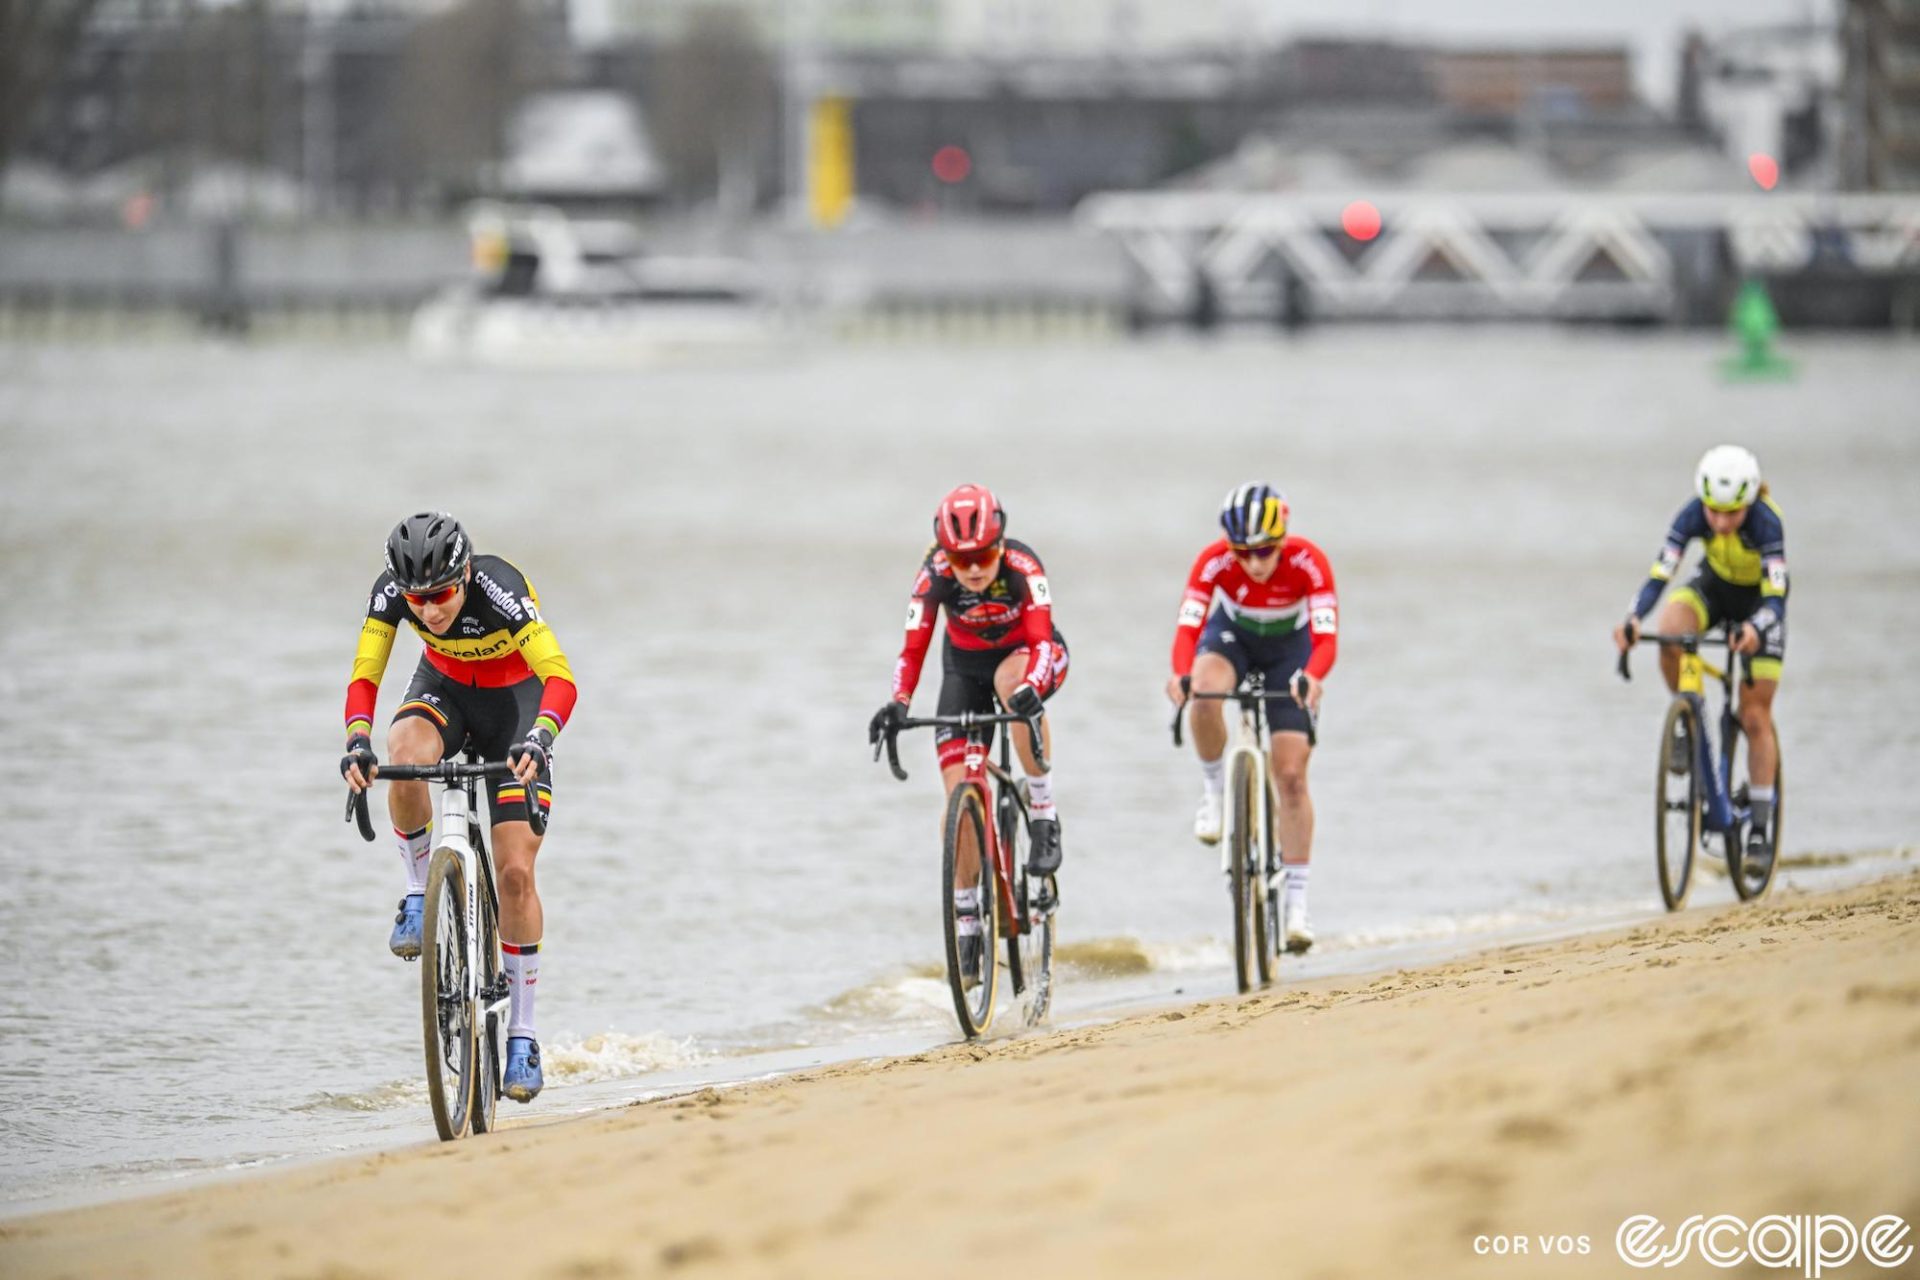 Sanne Cant leads a line of riders on the beach section.